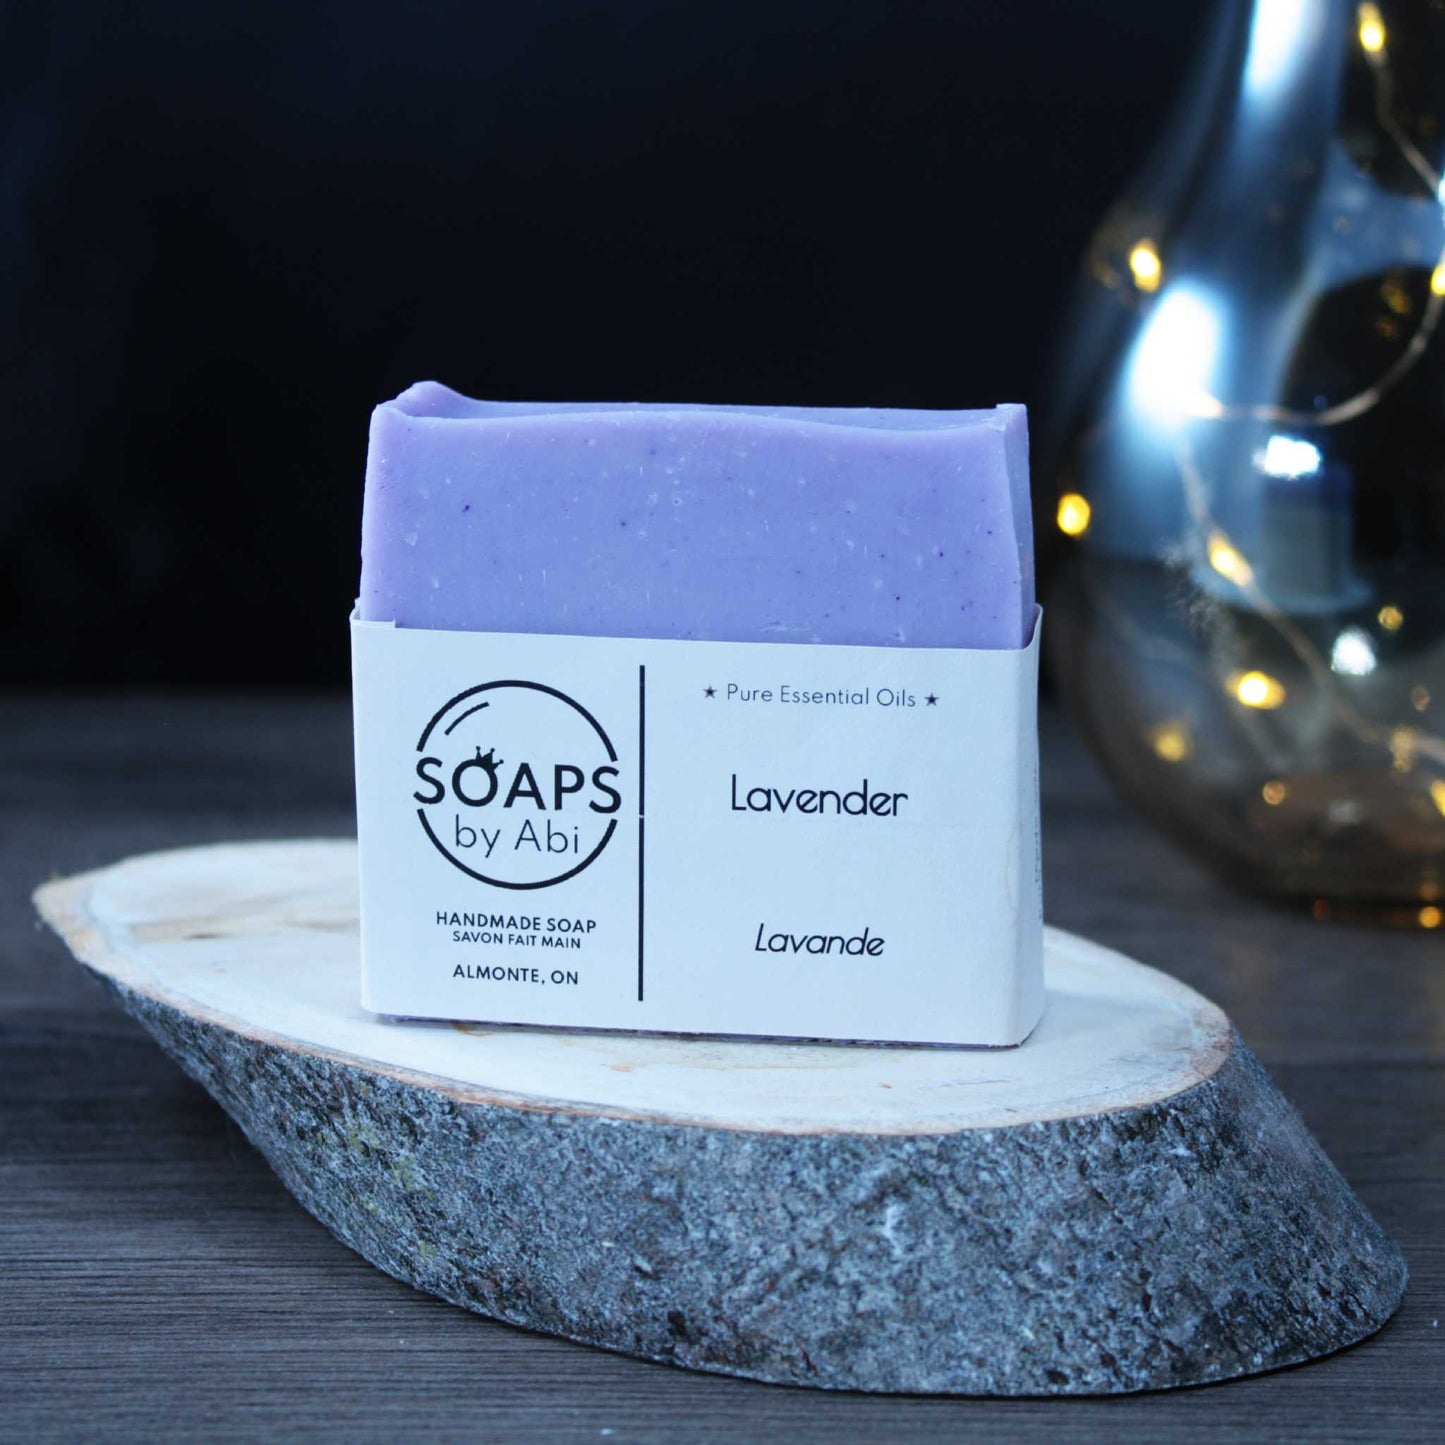 Lavender soap Soaps by Abi homemade in almonte ontario